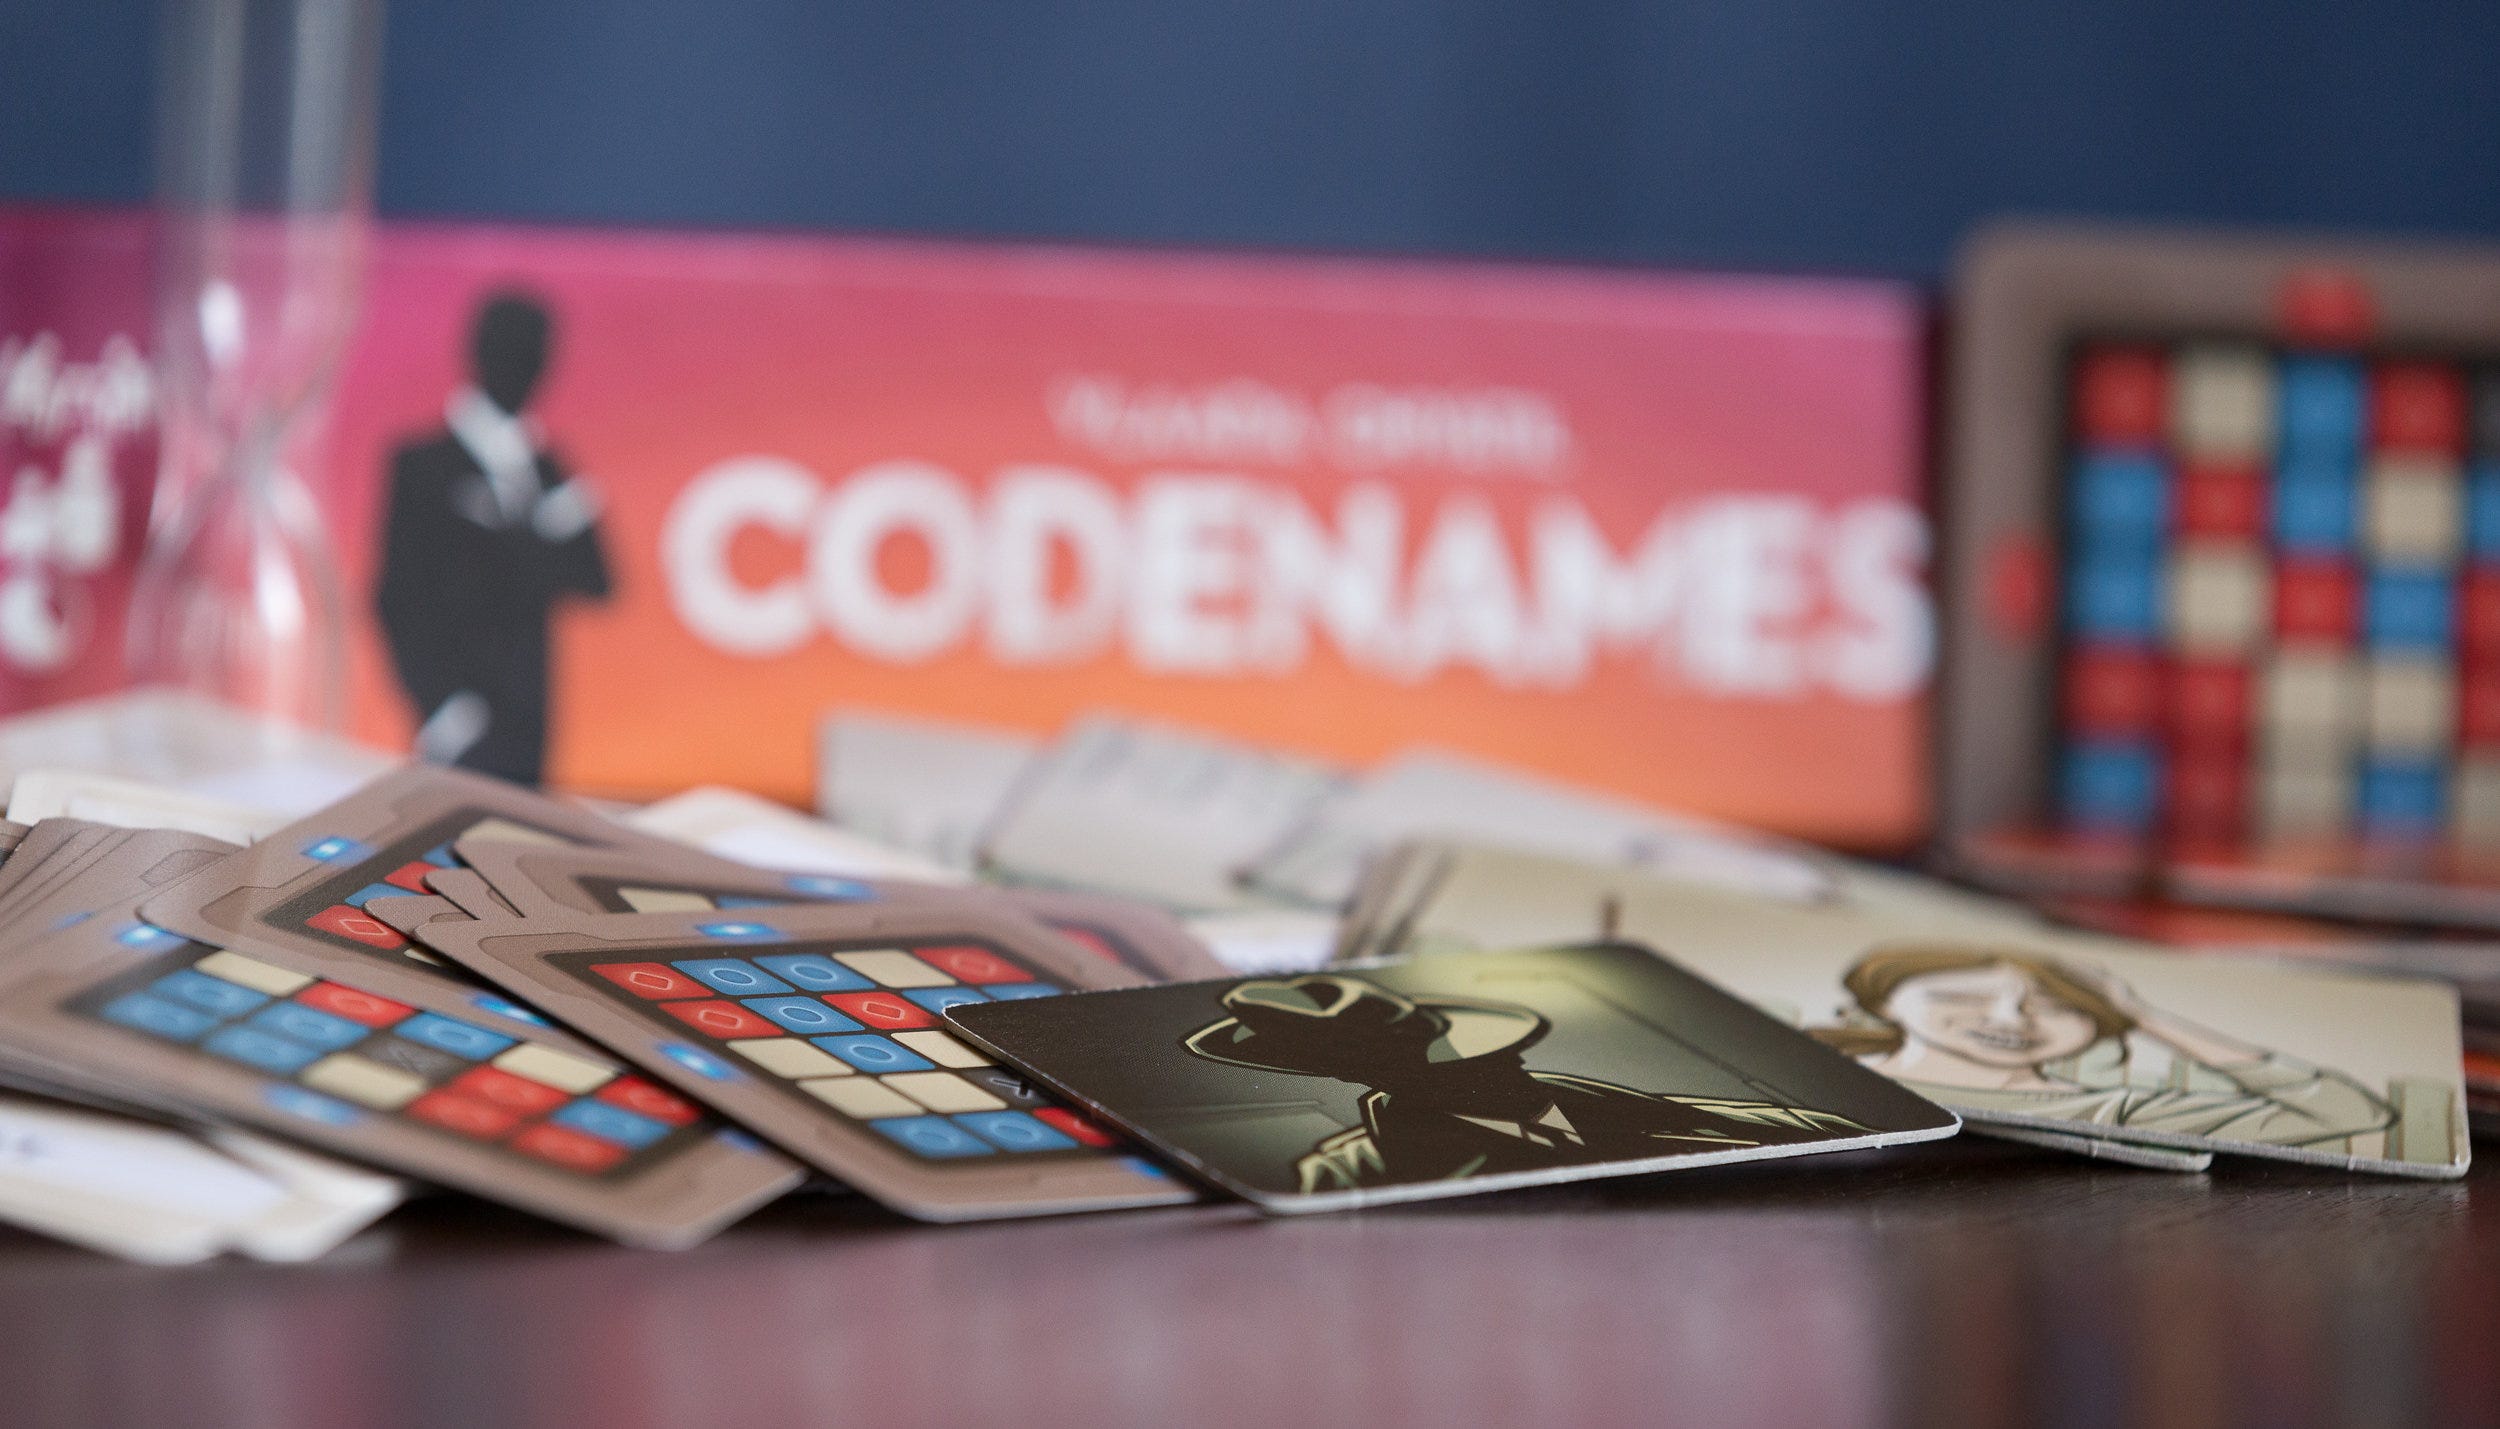 How to Win as the Spymaster in Codenames: 7 Strategy Tips - HobbyLark